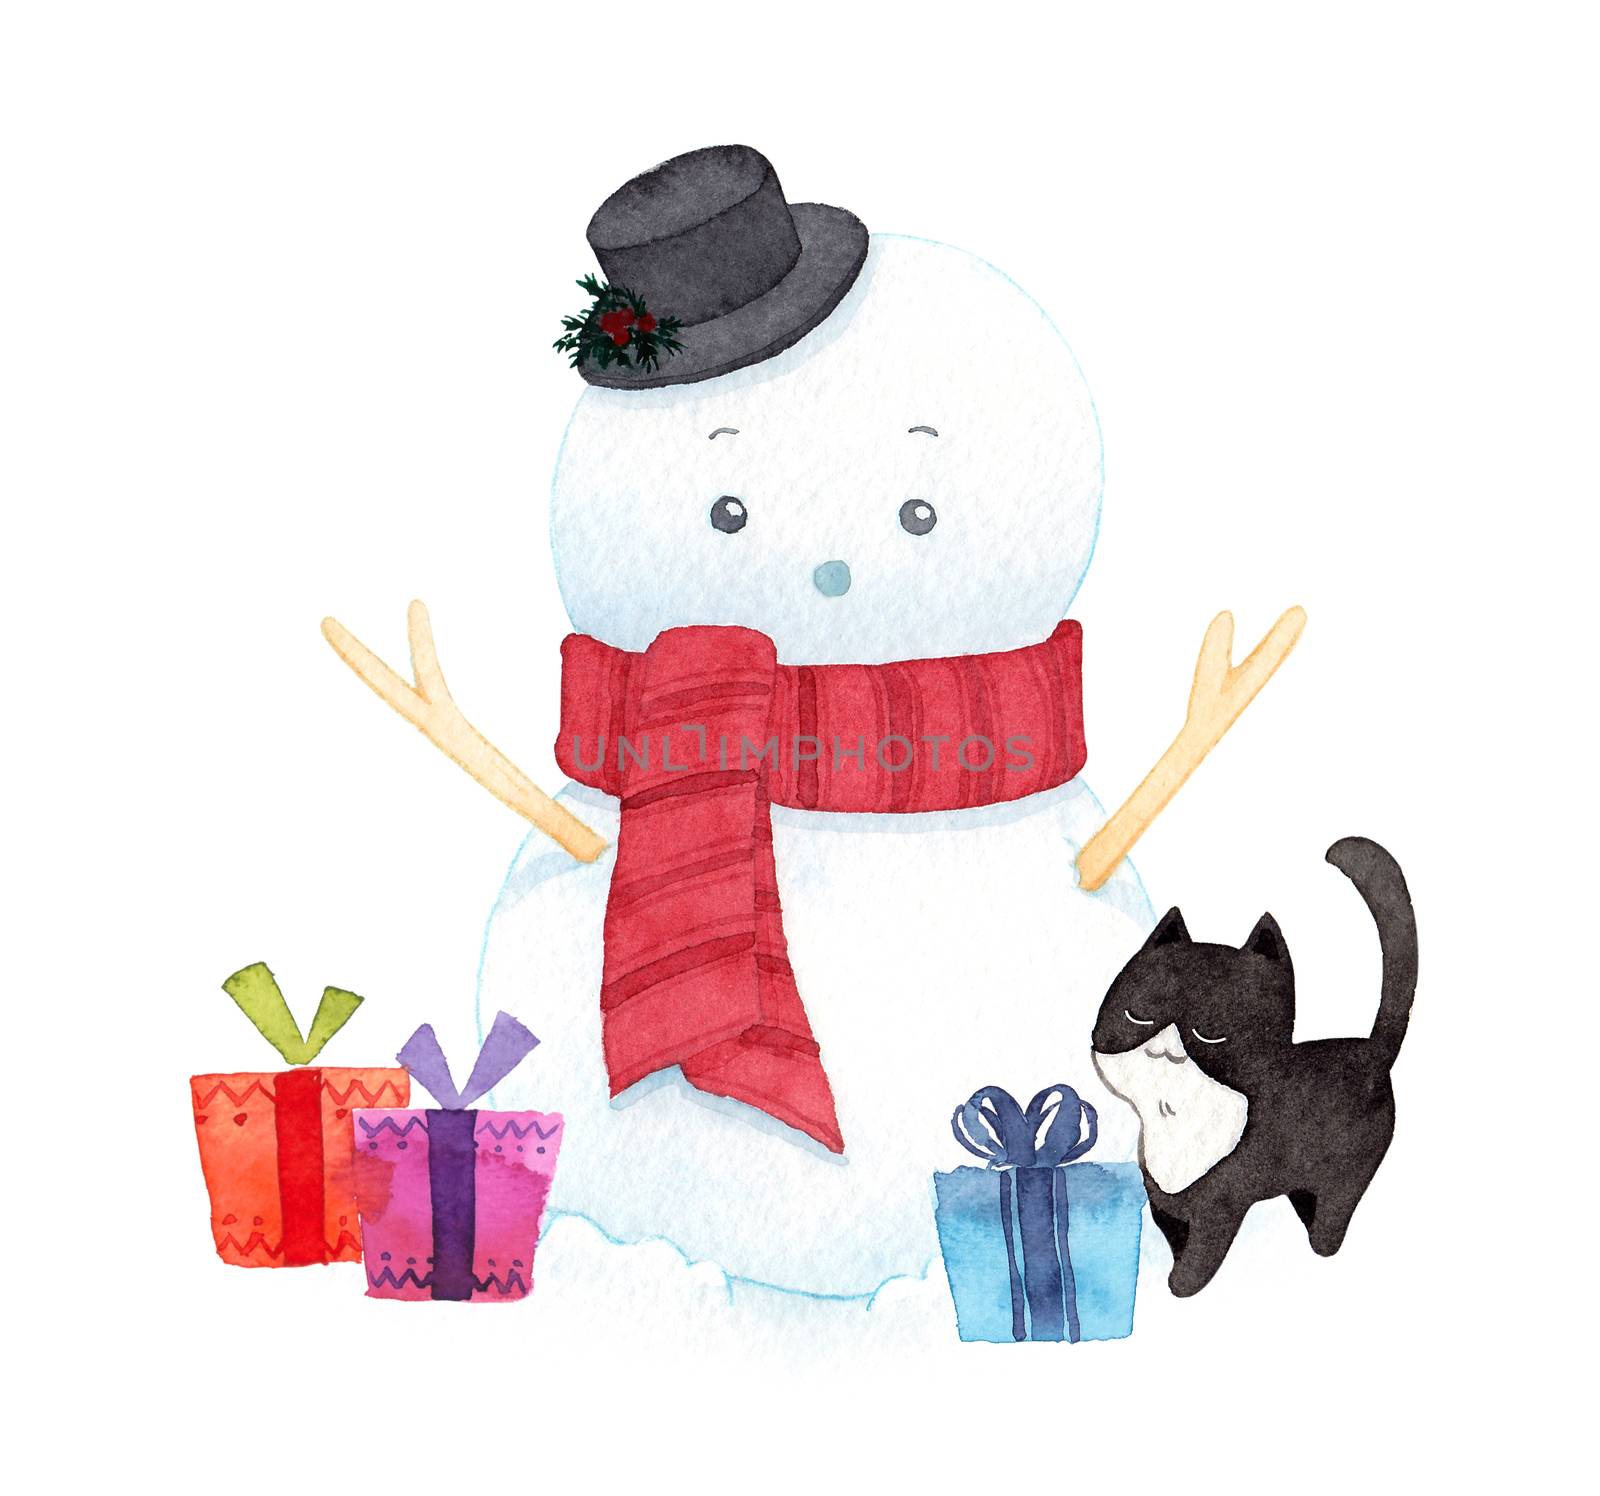 Cute christmas snowman wearing hat and scarf and cat on white background. watercolor illustrations. Painting for decoration in winter advertising. by Ungamrung